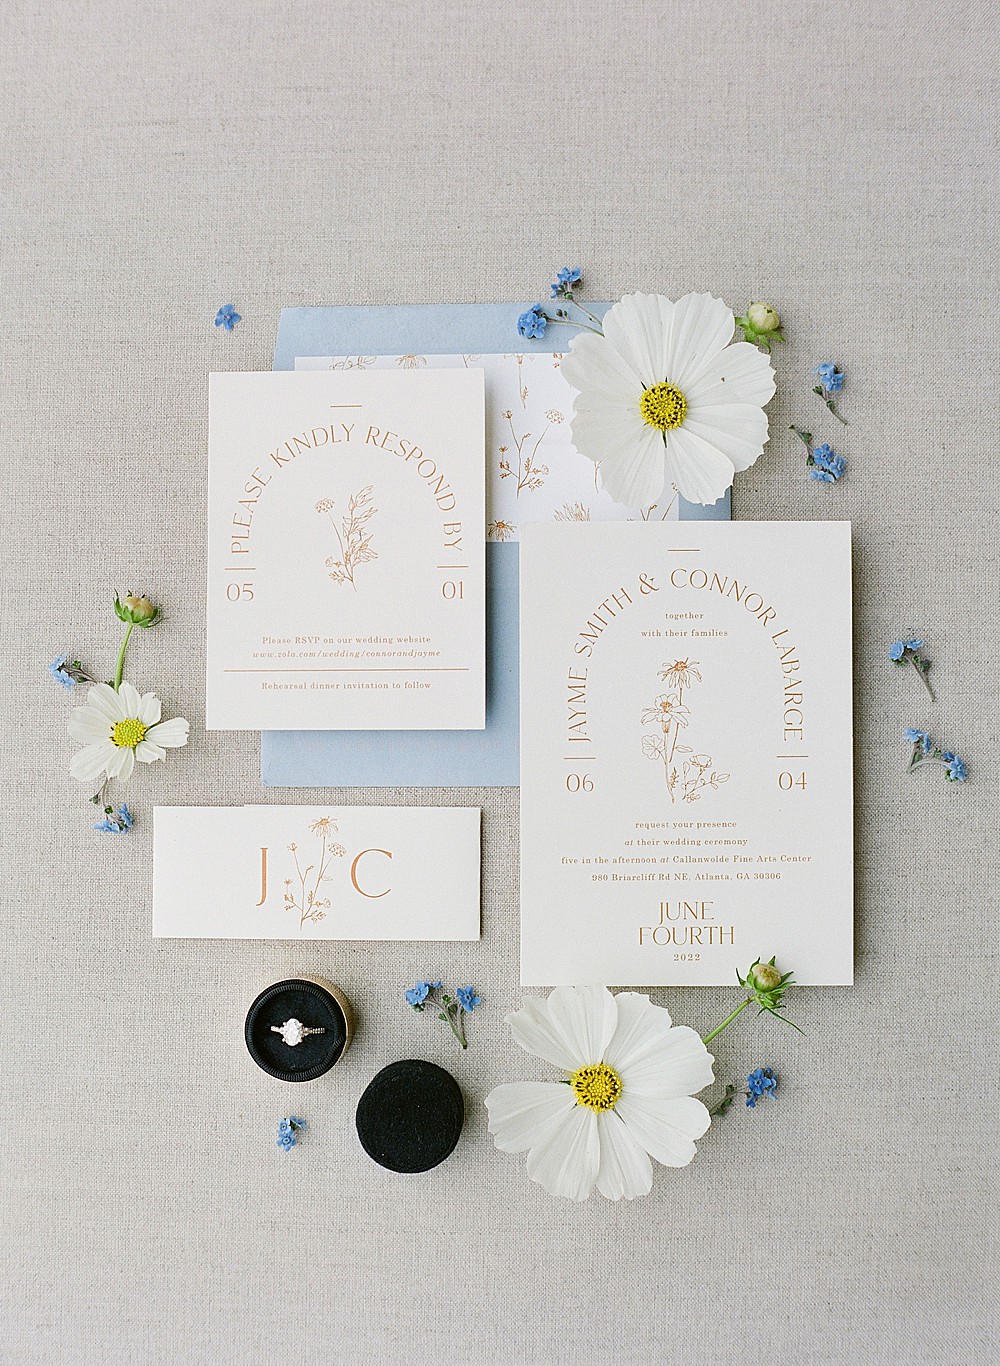 Blue and yellow invitation suite with daisies for a wedding day